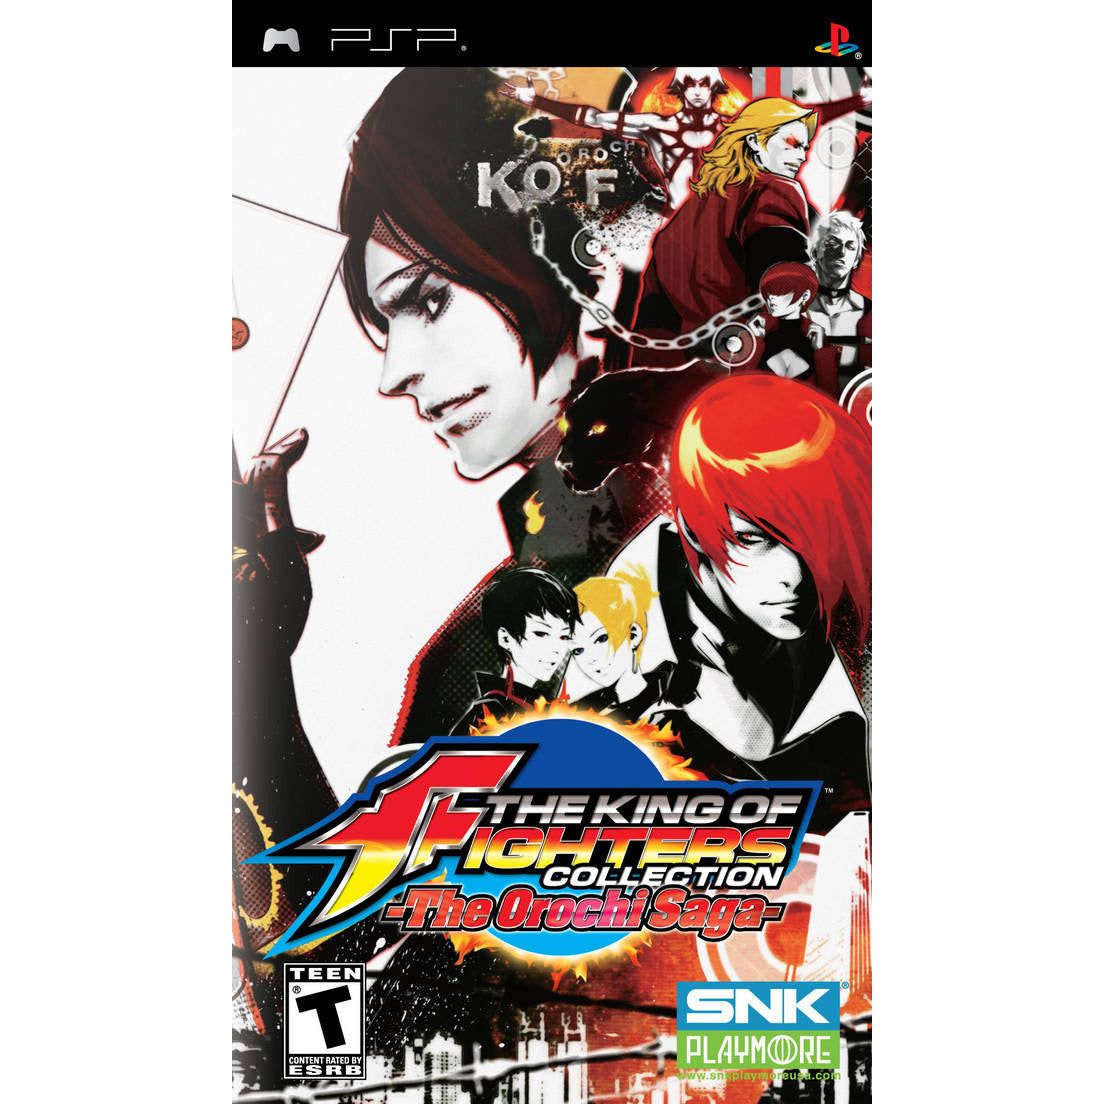 PSP - Collection The King of Fighters La Saga Orochi (Au cas où) 